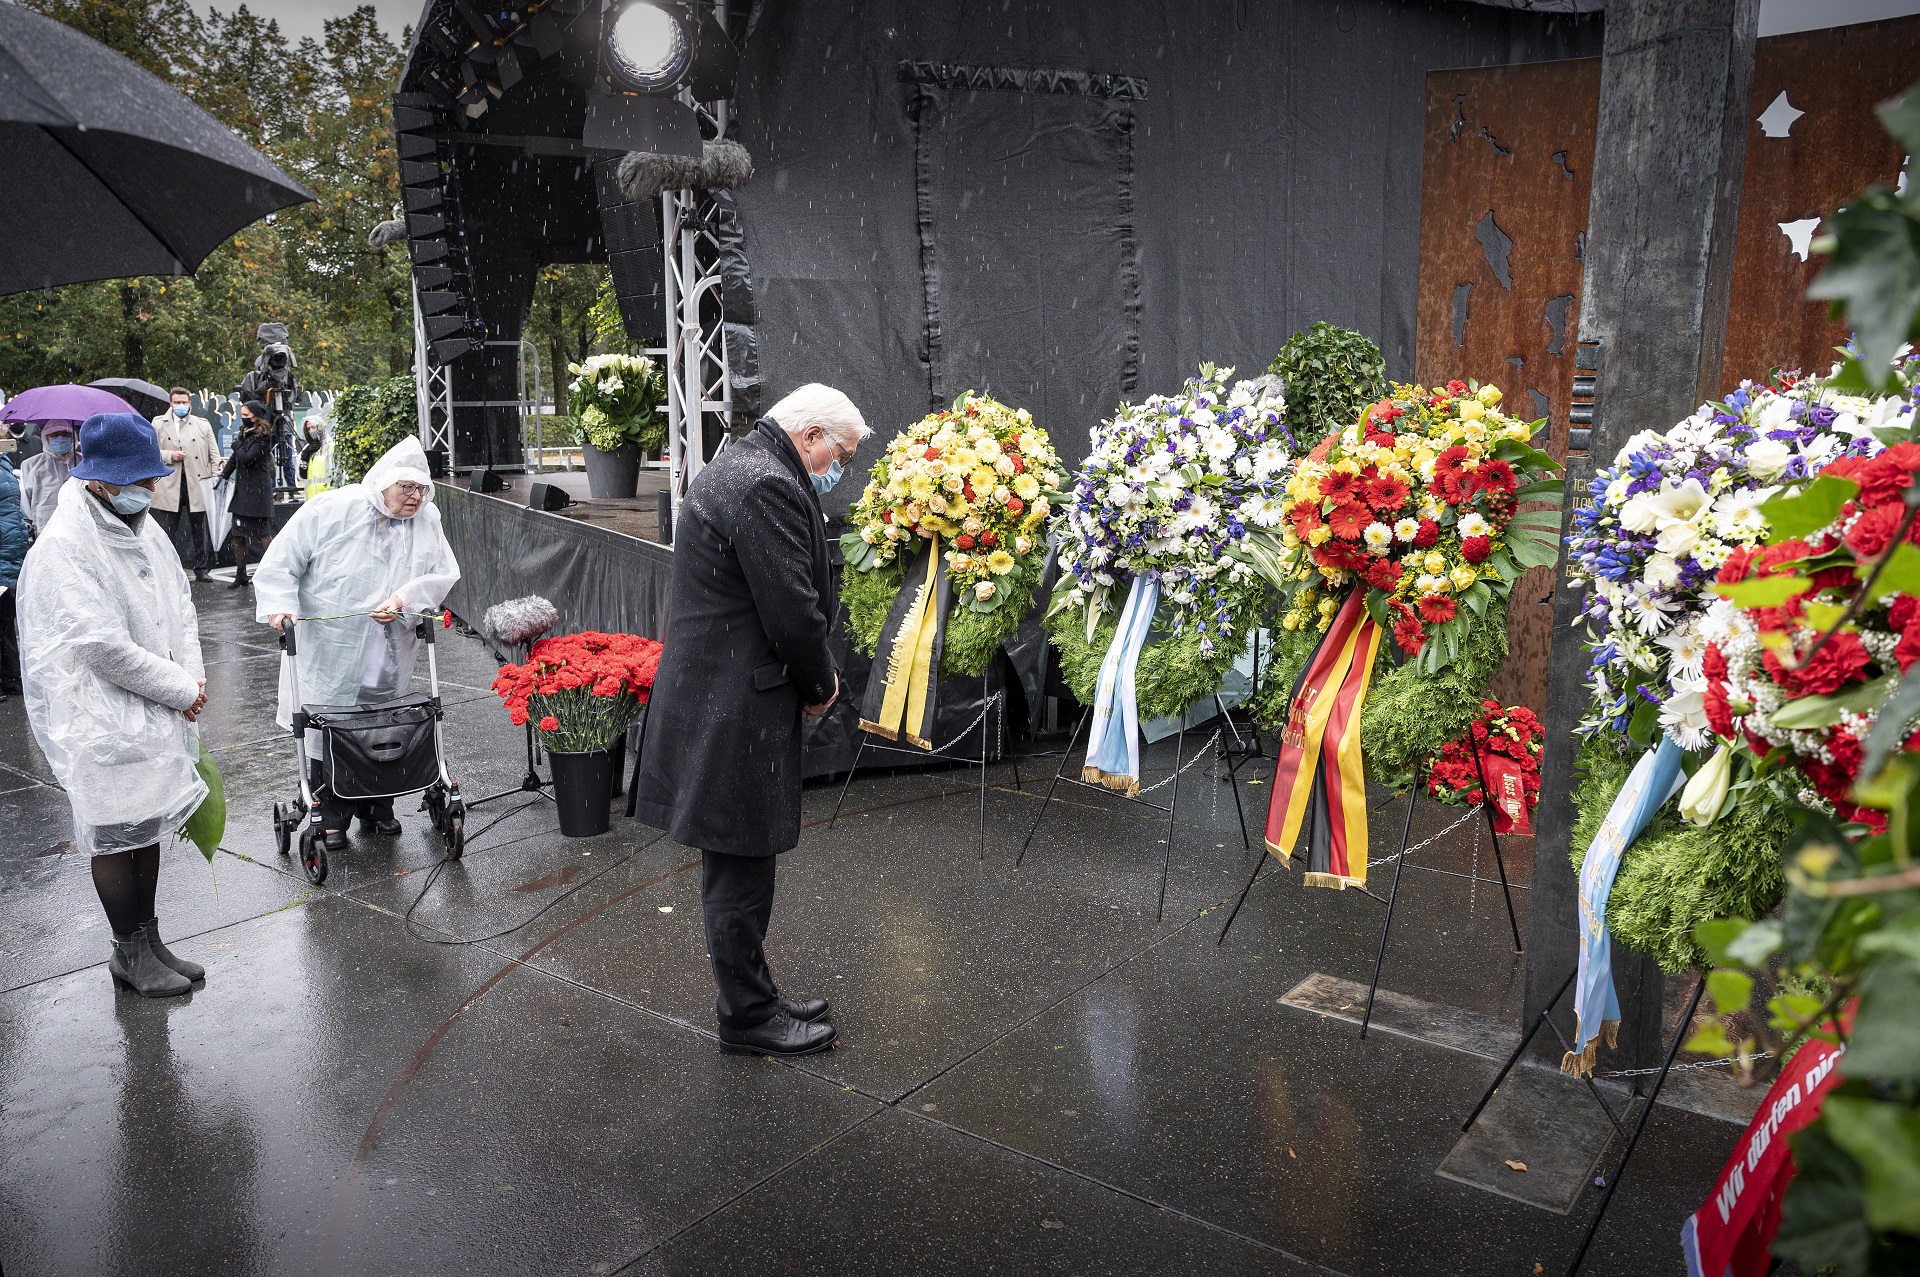 epa08698487 A handout photo made available by the German government shows German president Frank-Walter Steinmeier laying wreath next to survivors Gudrun Lang (L) and Renate Martinez (2-L) during a commemoration ceremony at the site of the 40th anniversary of the Oktoberfest bomb attack in Munich, Bavaria, Germany, 26 September 2020. A neo-Nazi blew himself up at Munich's Oktoberfest beer festival in 1980, killing 12 other people.  EPA/Guido Bergmann HANDOUT  HANDOUT EDITORIAL USE ONLY/NO SALES